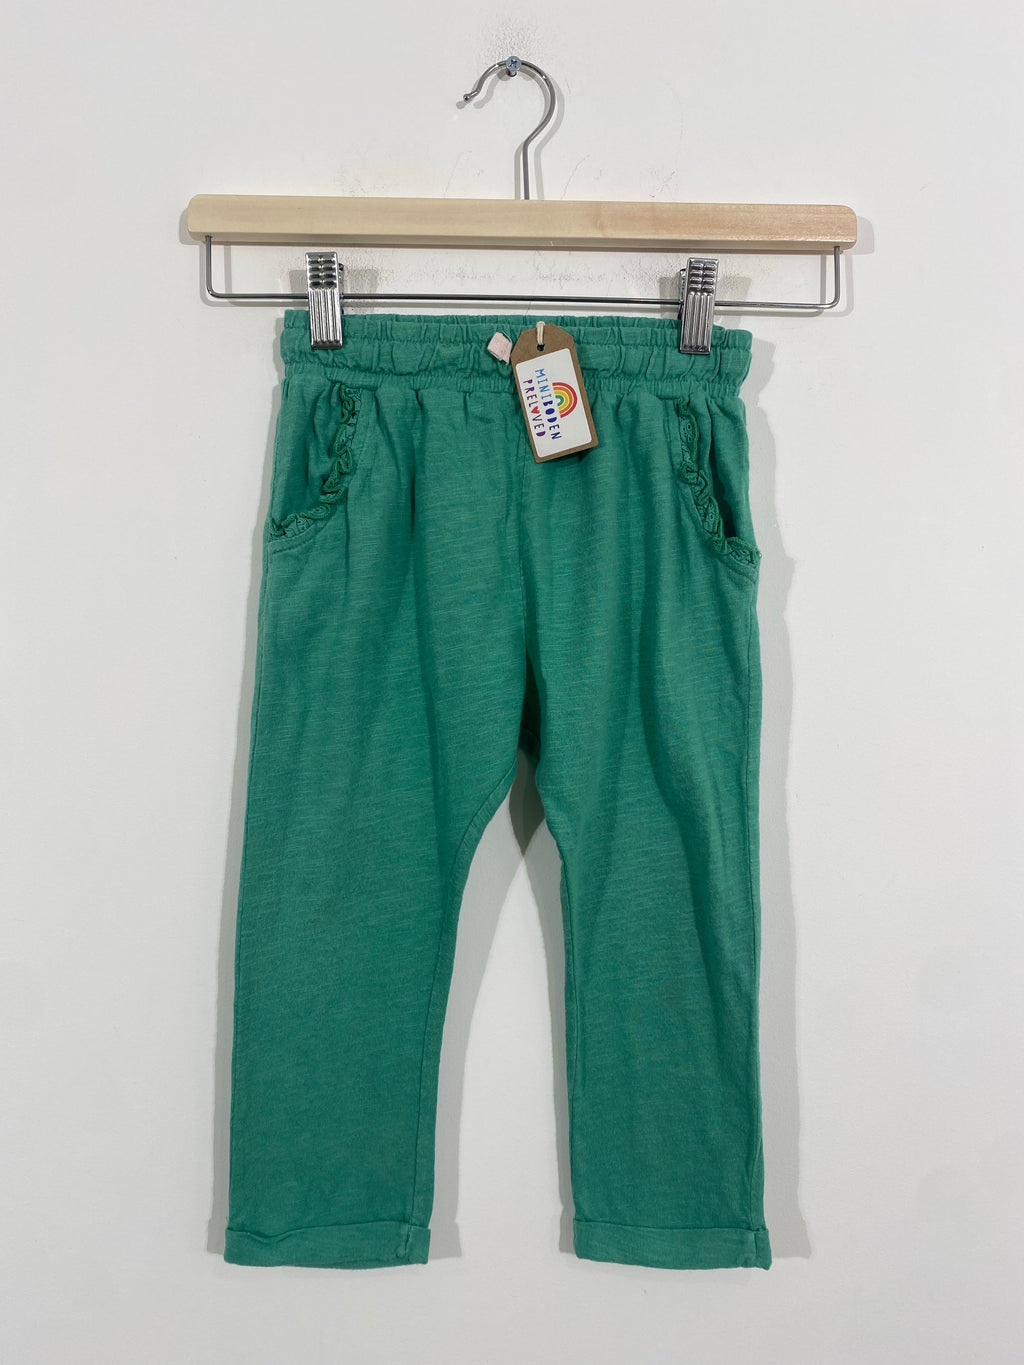 Emerald Green Soft Trousers (18-24 Months)